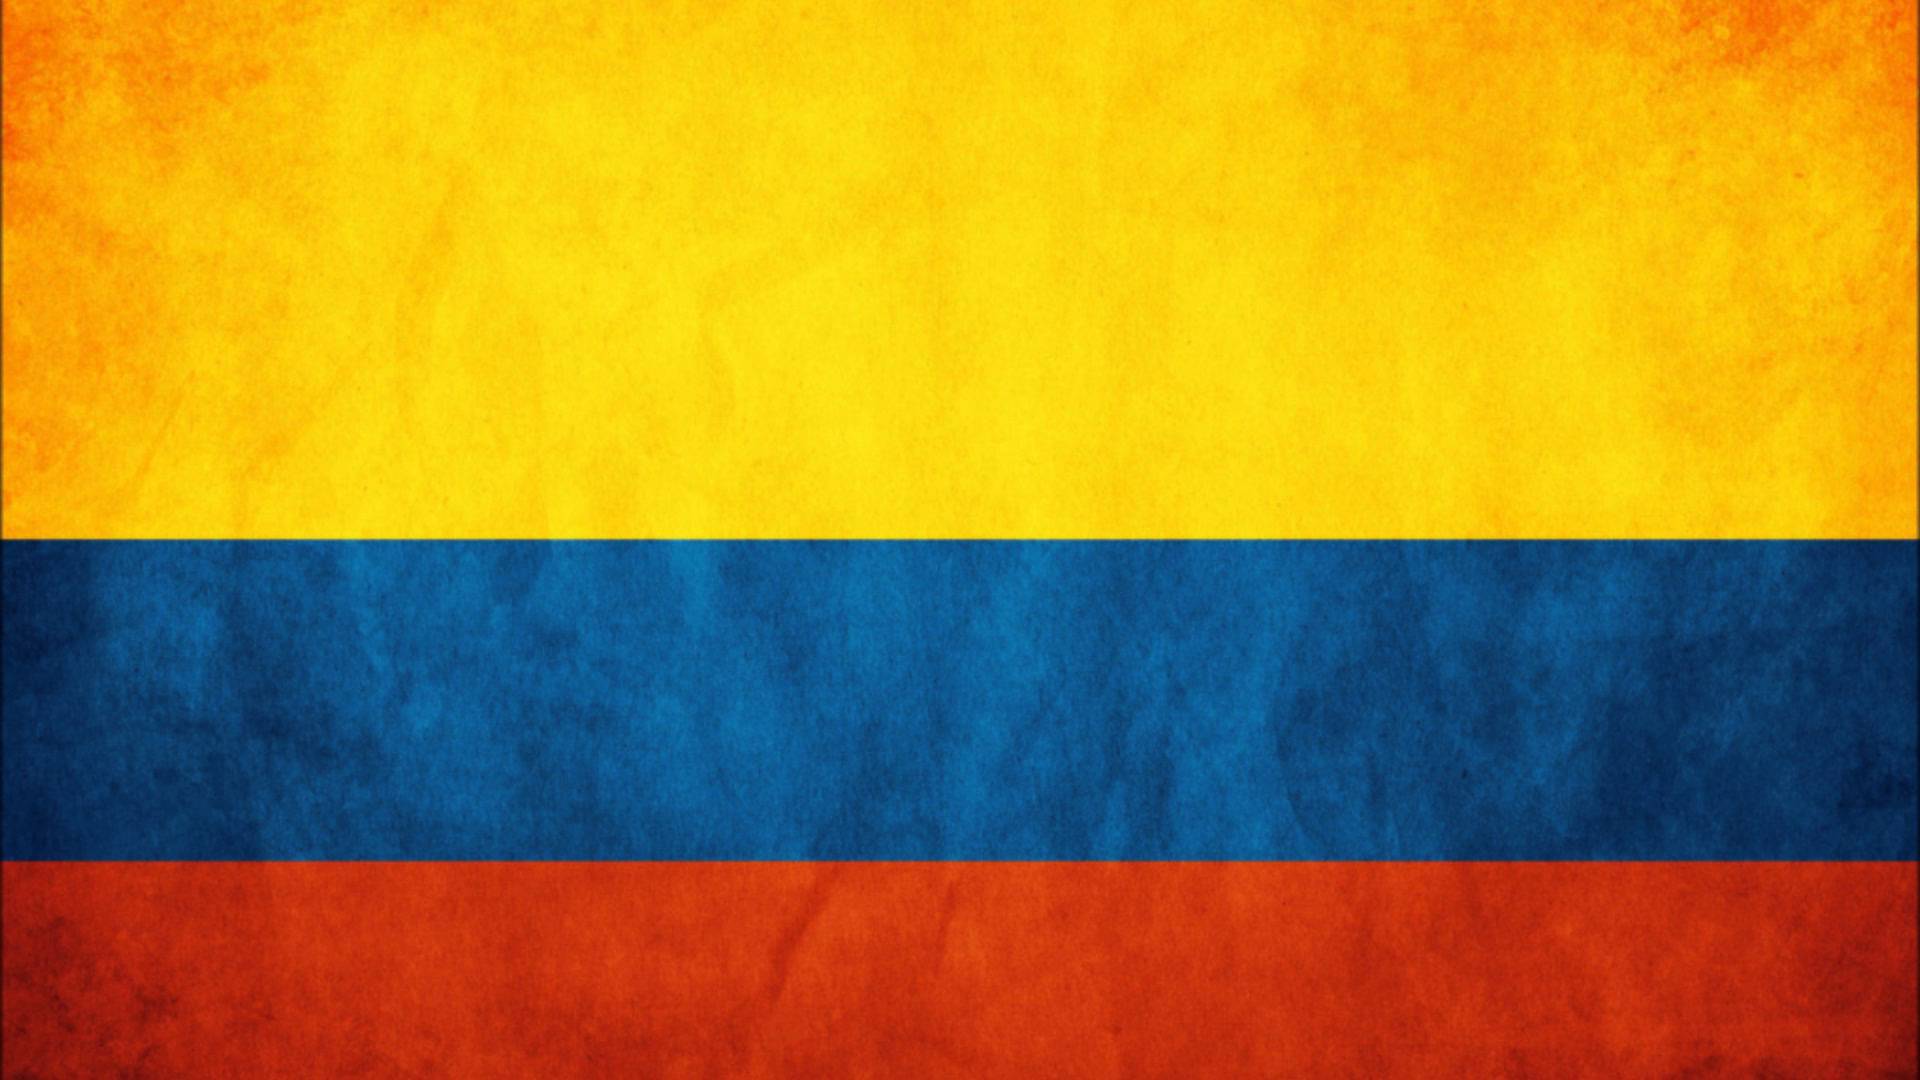 National Anthem of Colombia (vocal) - YouTube